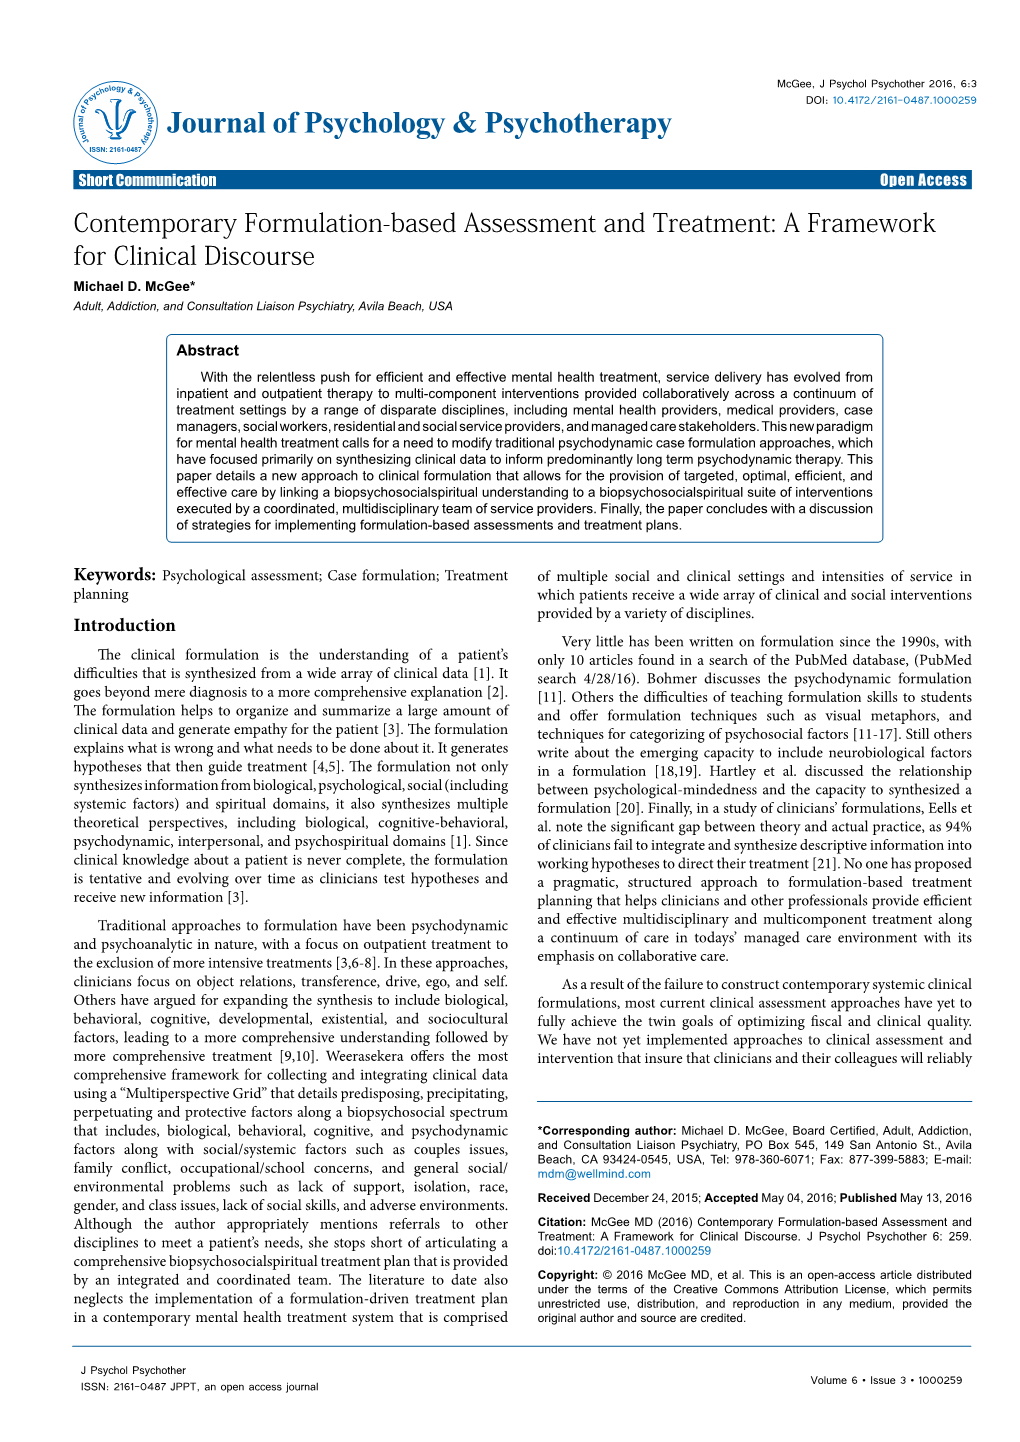 Contemporary Formulation-Based Assessment and Treatment: a Framework for Clinical Discourse Michael D